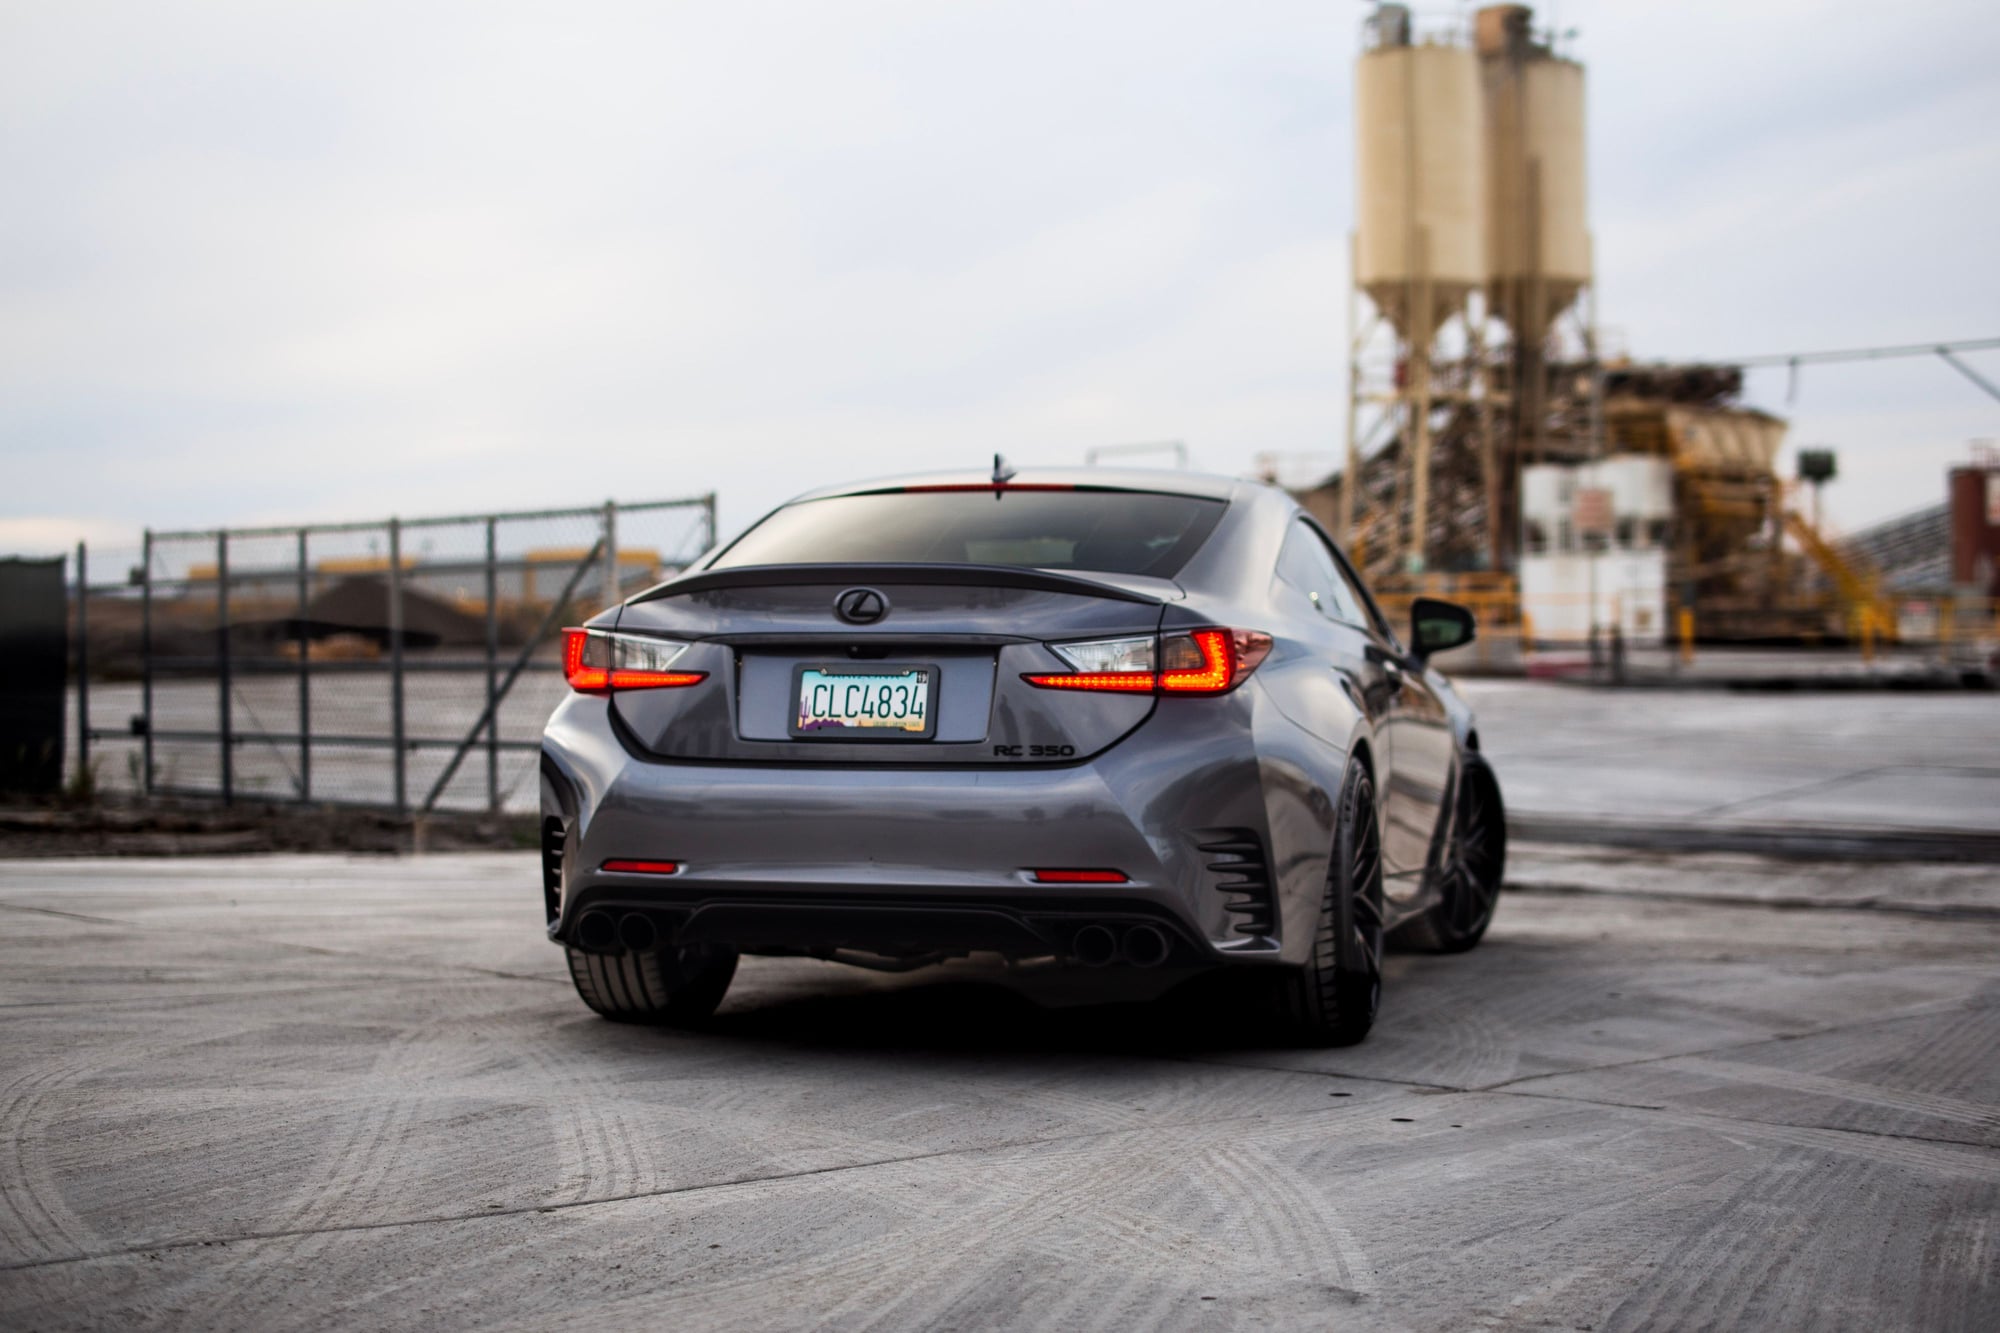 Engine - Exhaust - Xx350/xx250 custom 2.5" catted exhaust - Used - 2014 to 2019 Lexus IS350 - 2015 to 2019 Lexus RC350 - 2014 to 2019 Lexus IS250 - Scottsdale, AZ 85266, United States